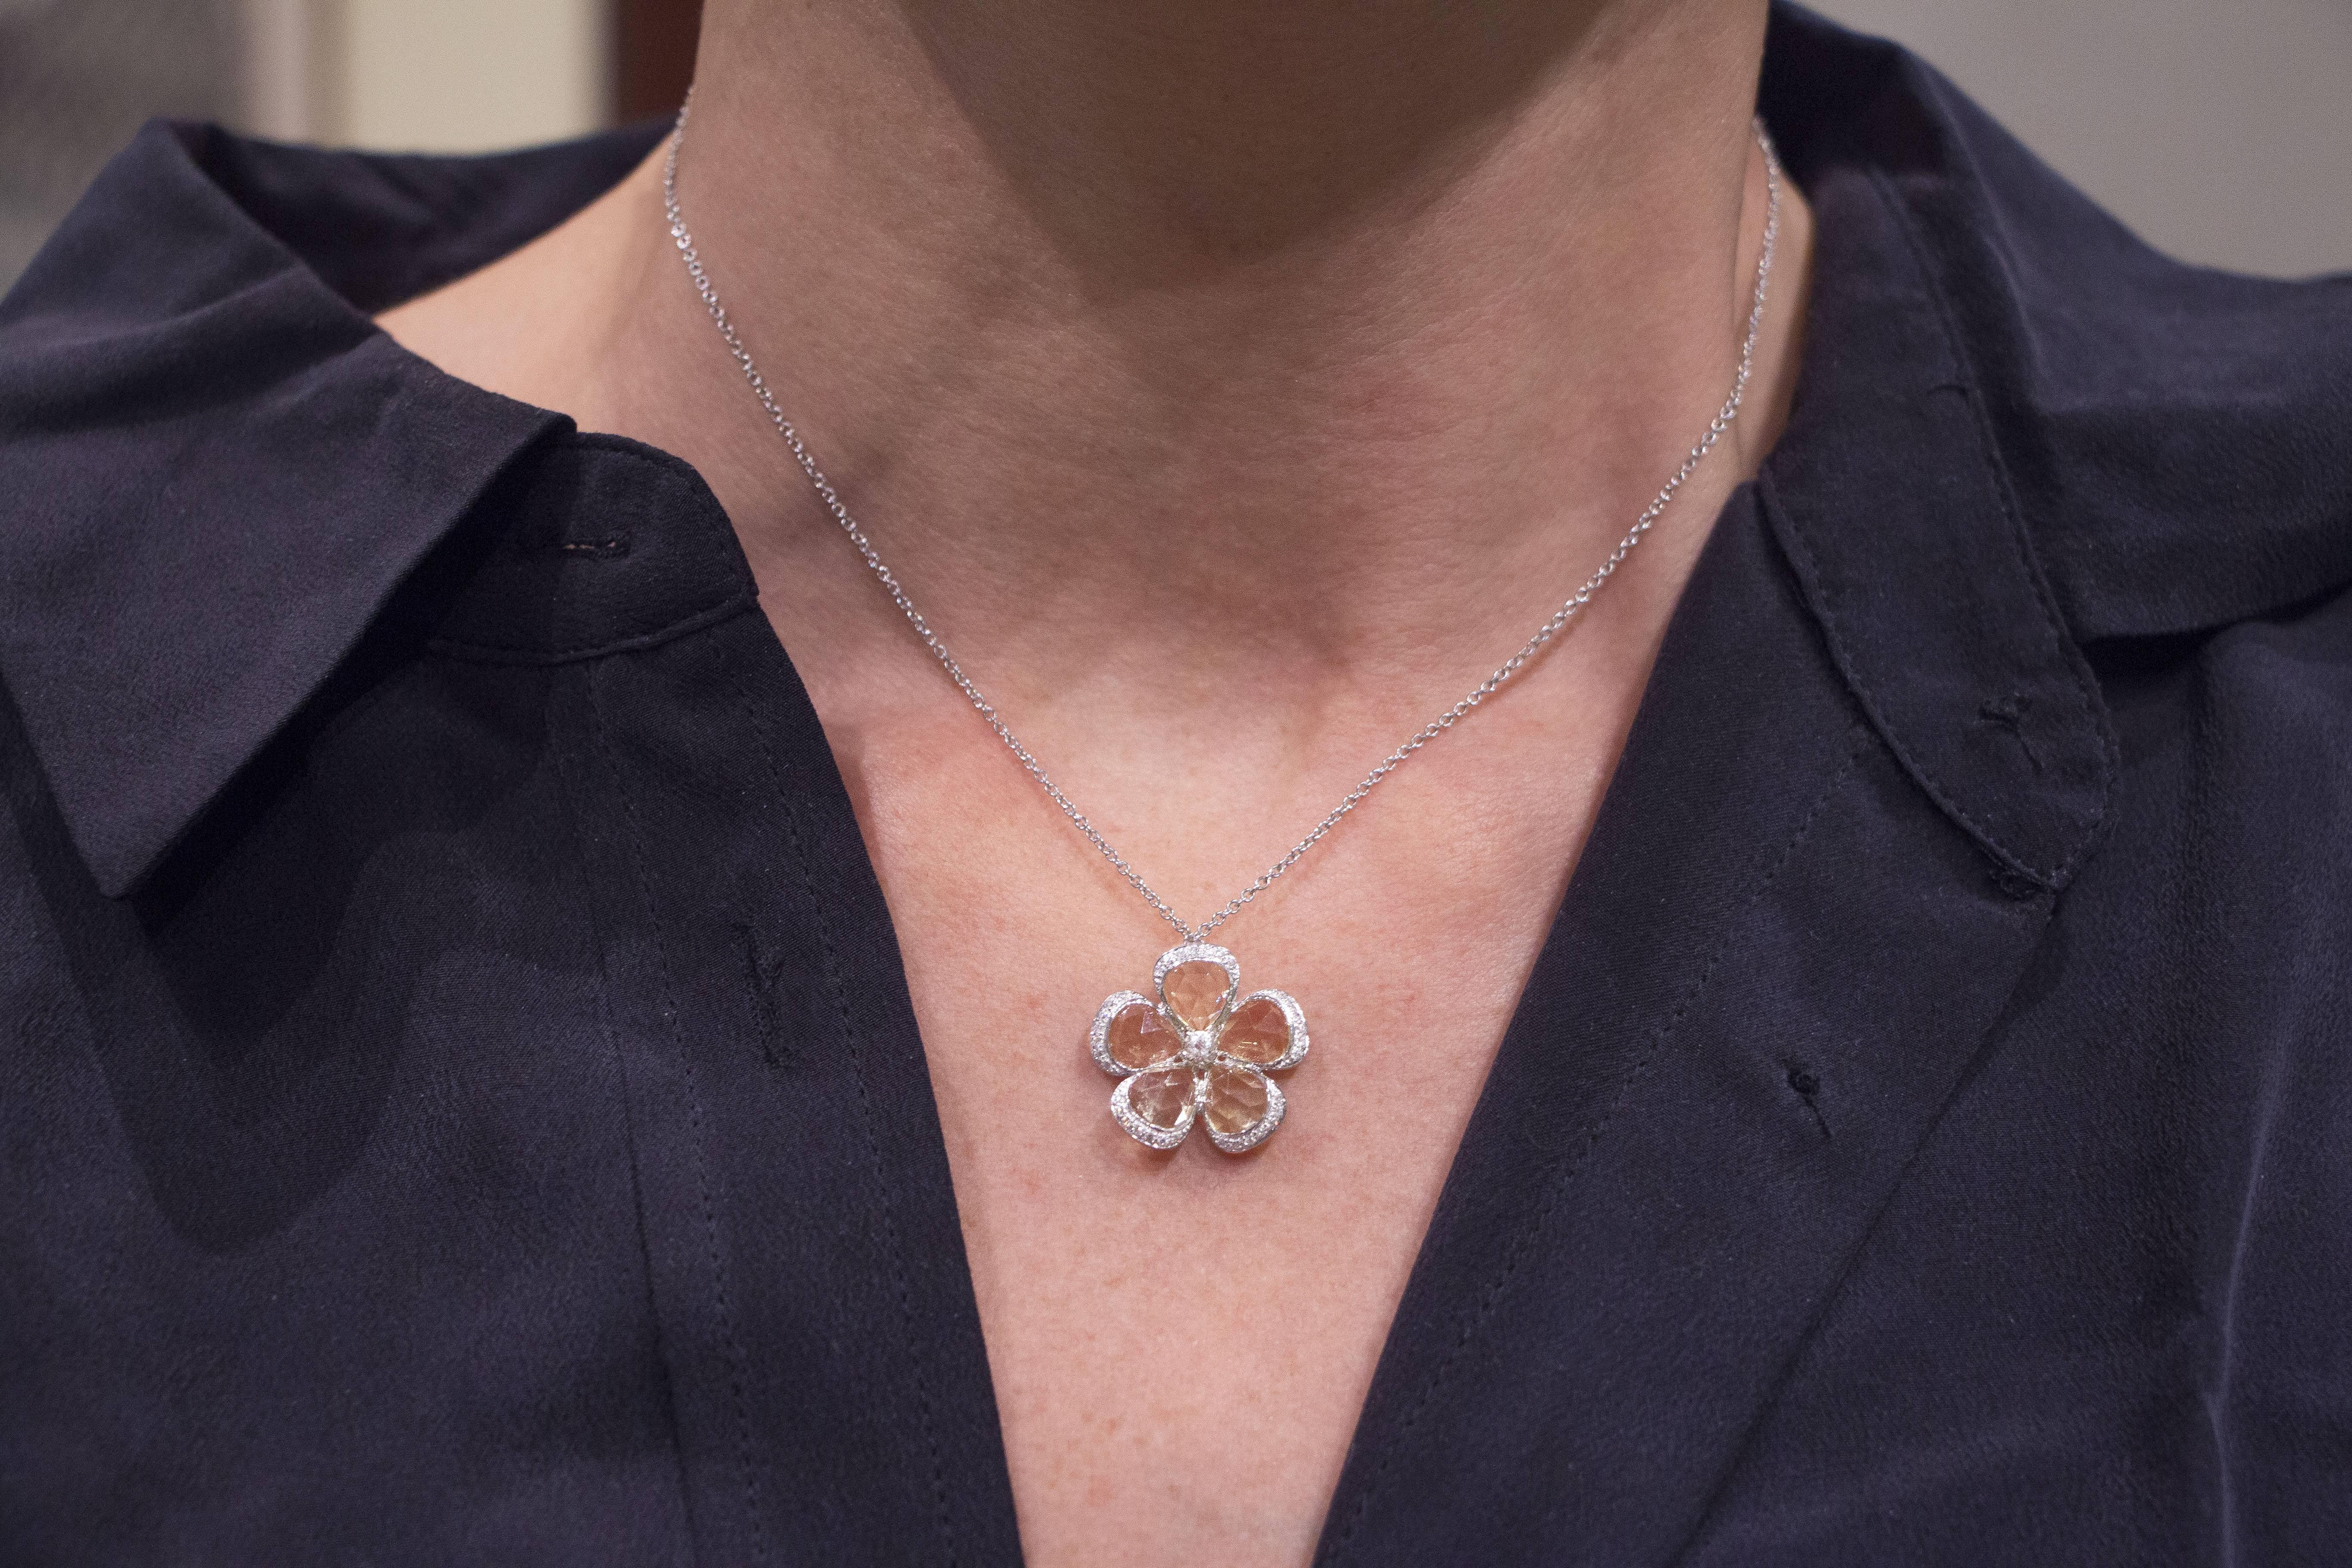 Jona design collection, hand crafted in Italy, 18 karat white gold flower pendant, set with 3.95 carats of faceted citrine petals, surrounded by 0.13 carats of white diamonds, suspending from a 18 karat white gold chain necklace, 18 inch - 45cm